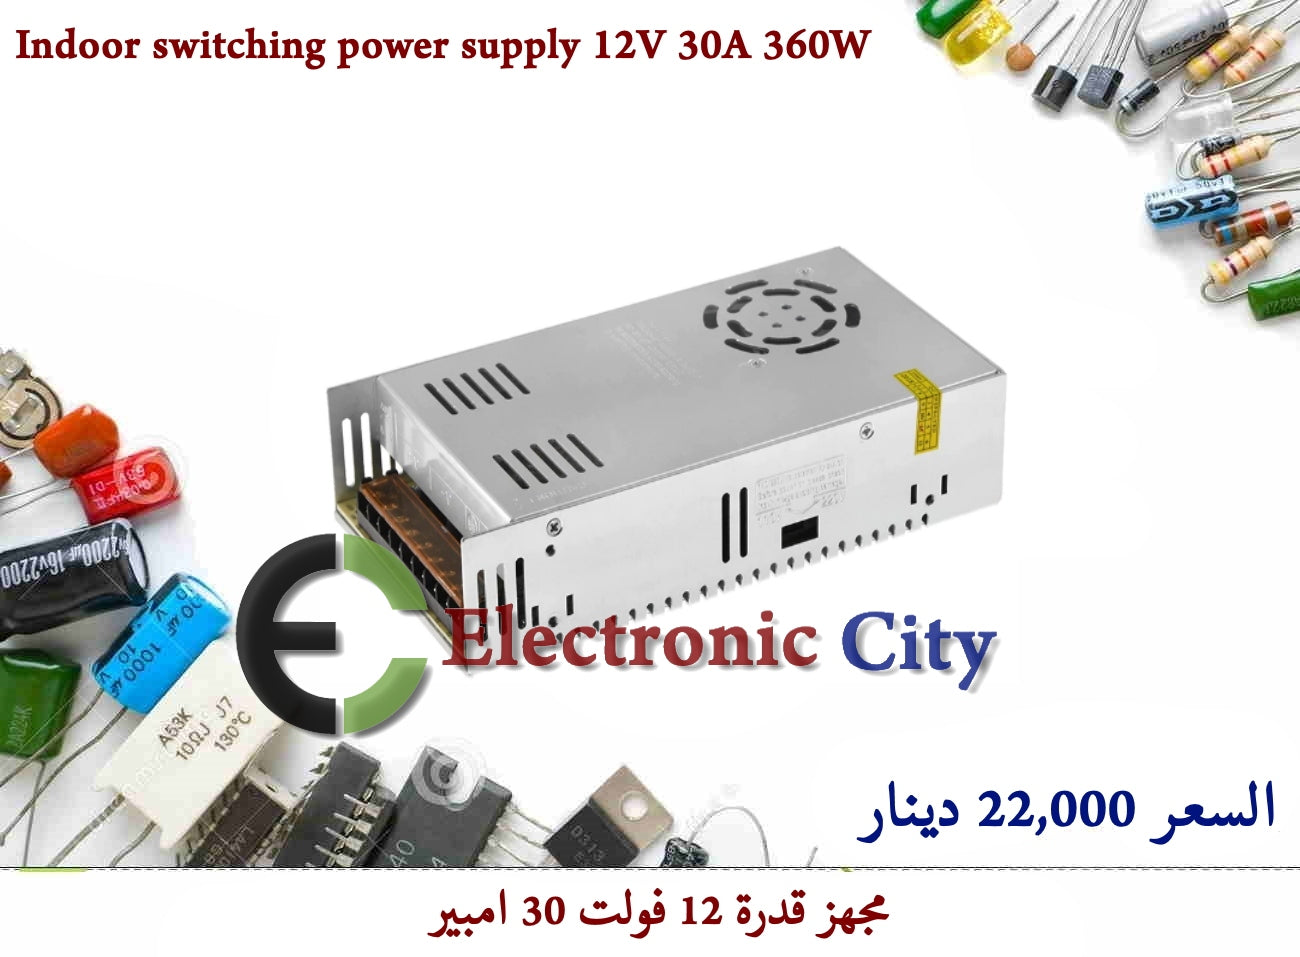 Indoor switching power supply 12V 30A 360W